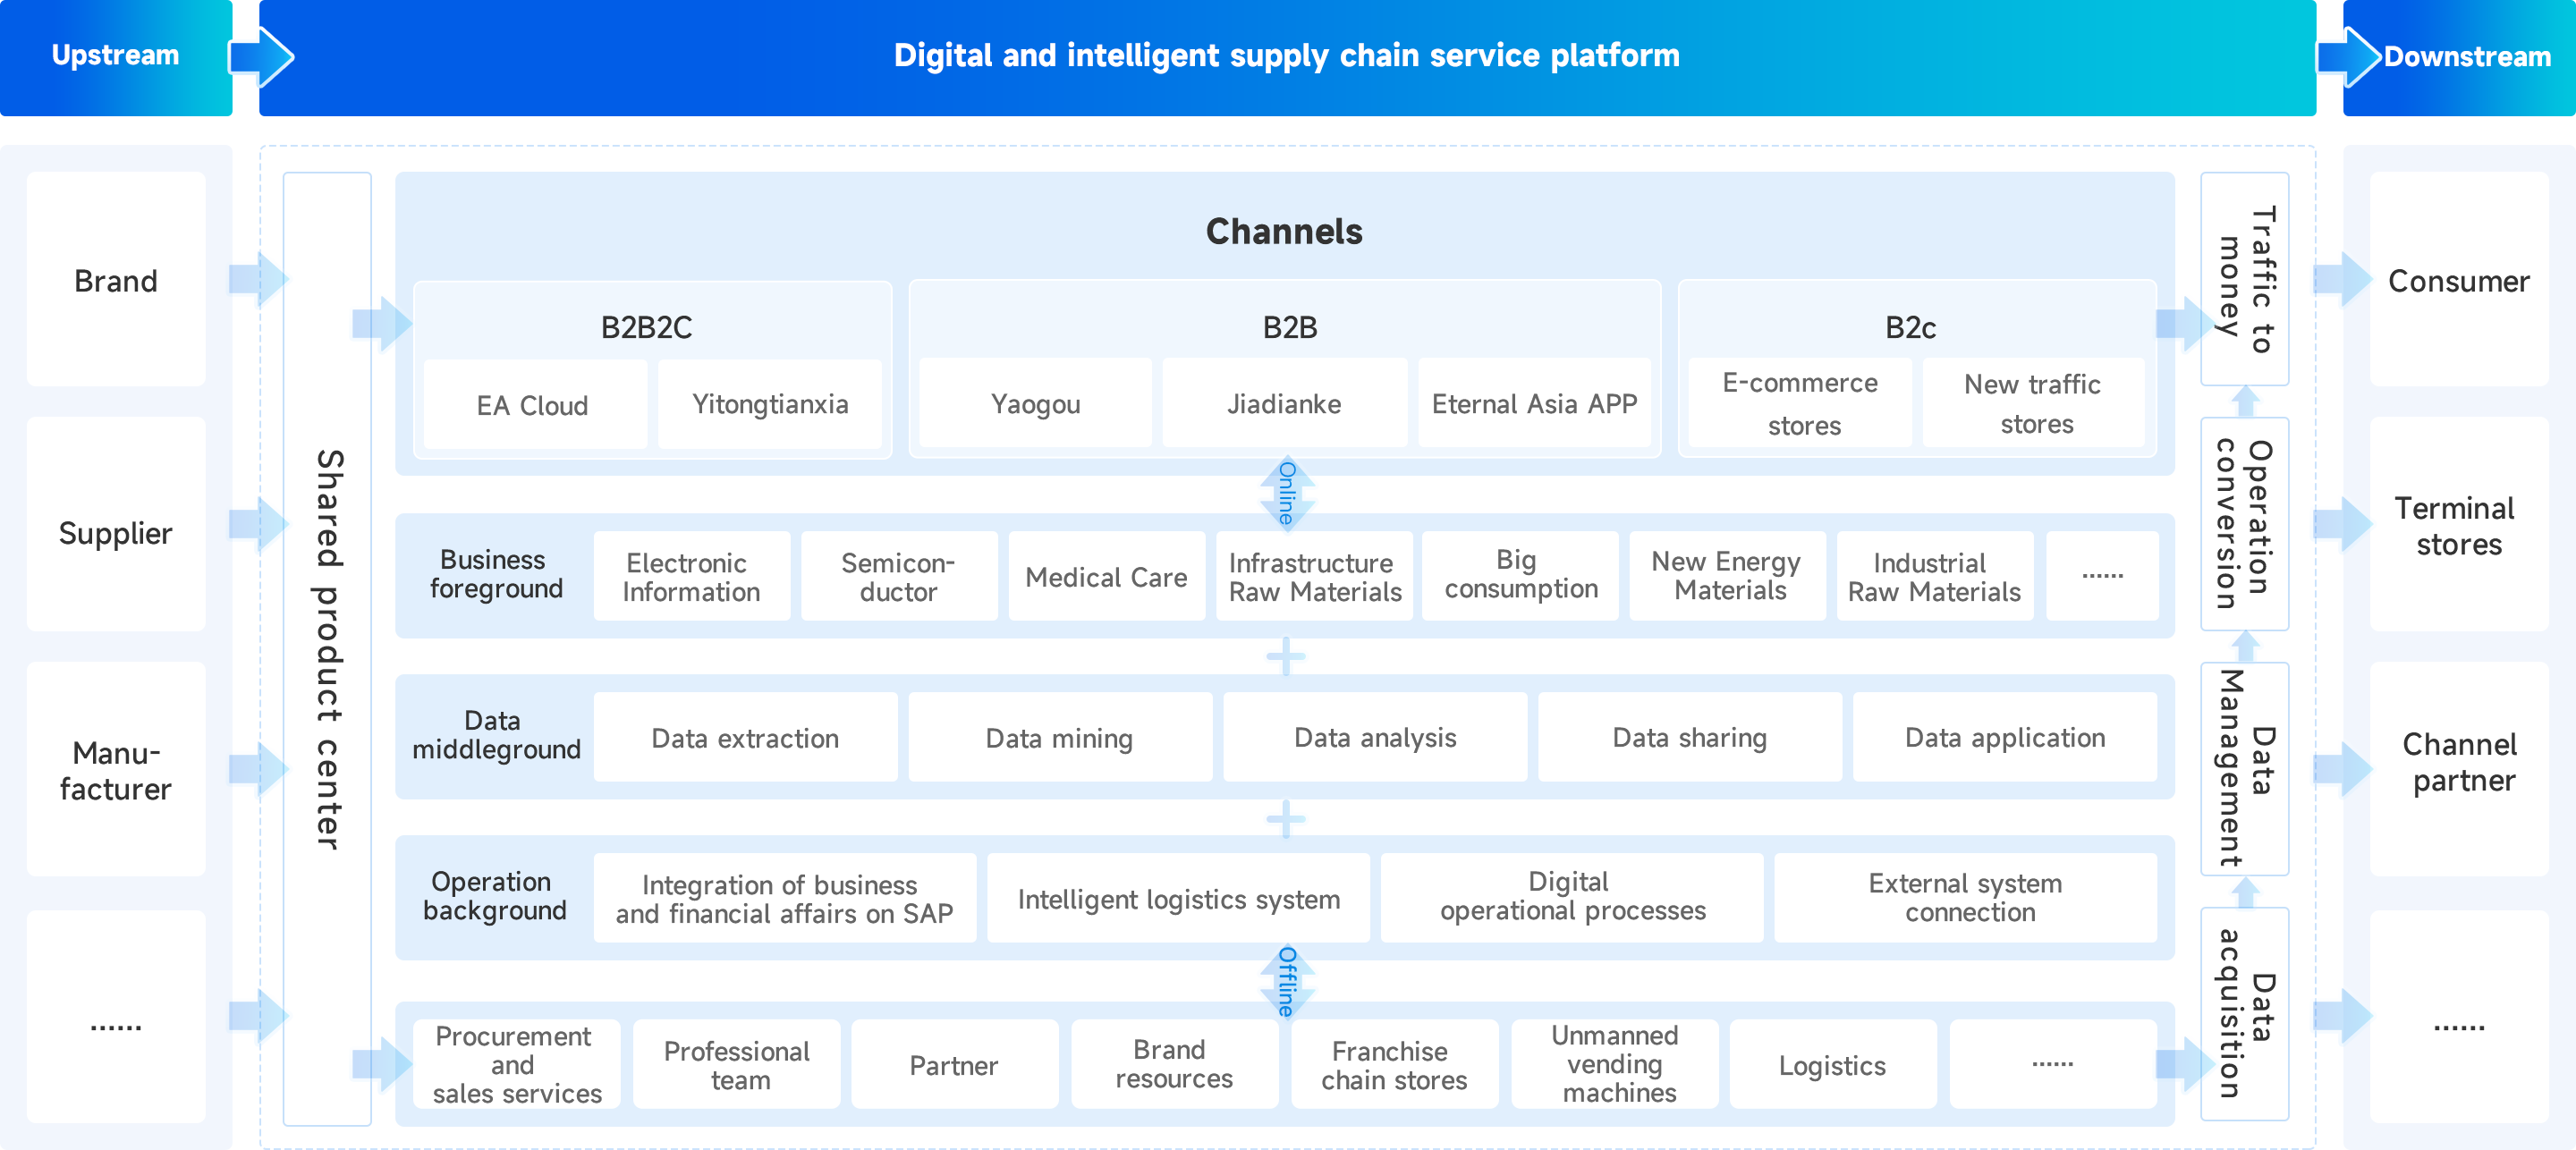 Panorama of Services Covering the Whole Supply Chain